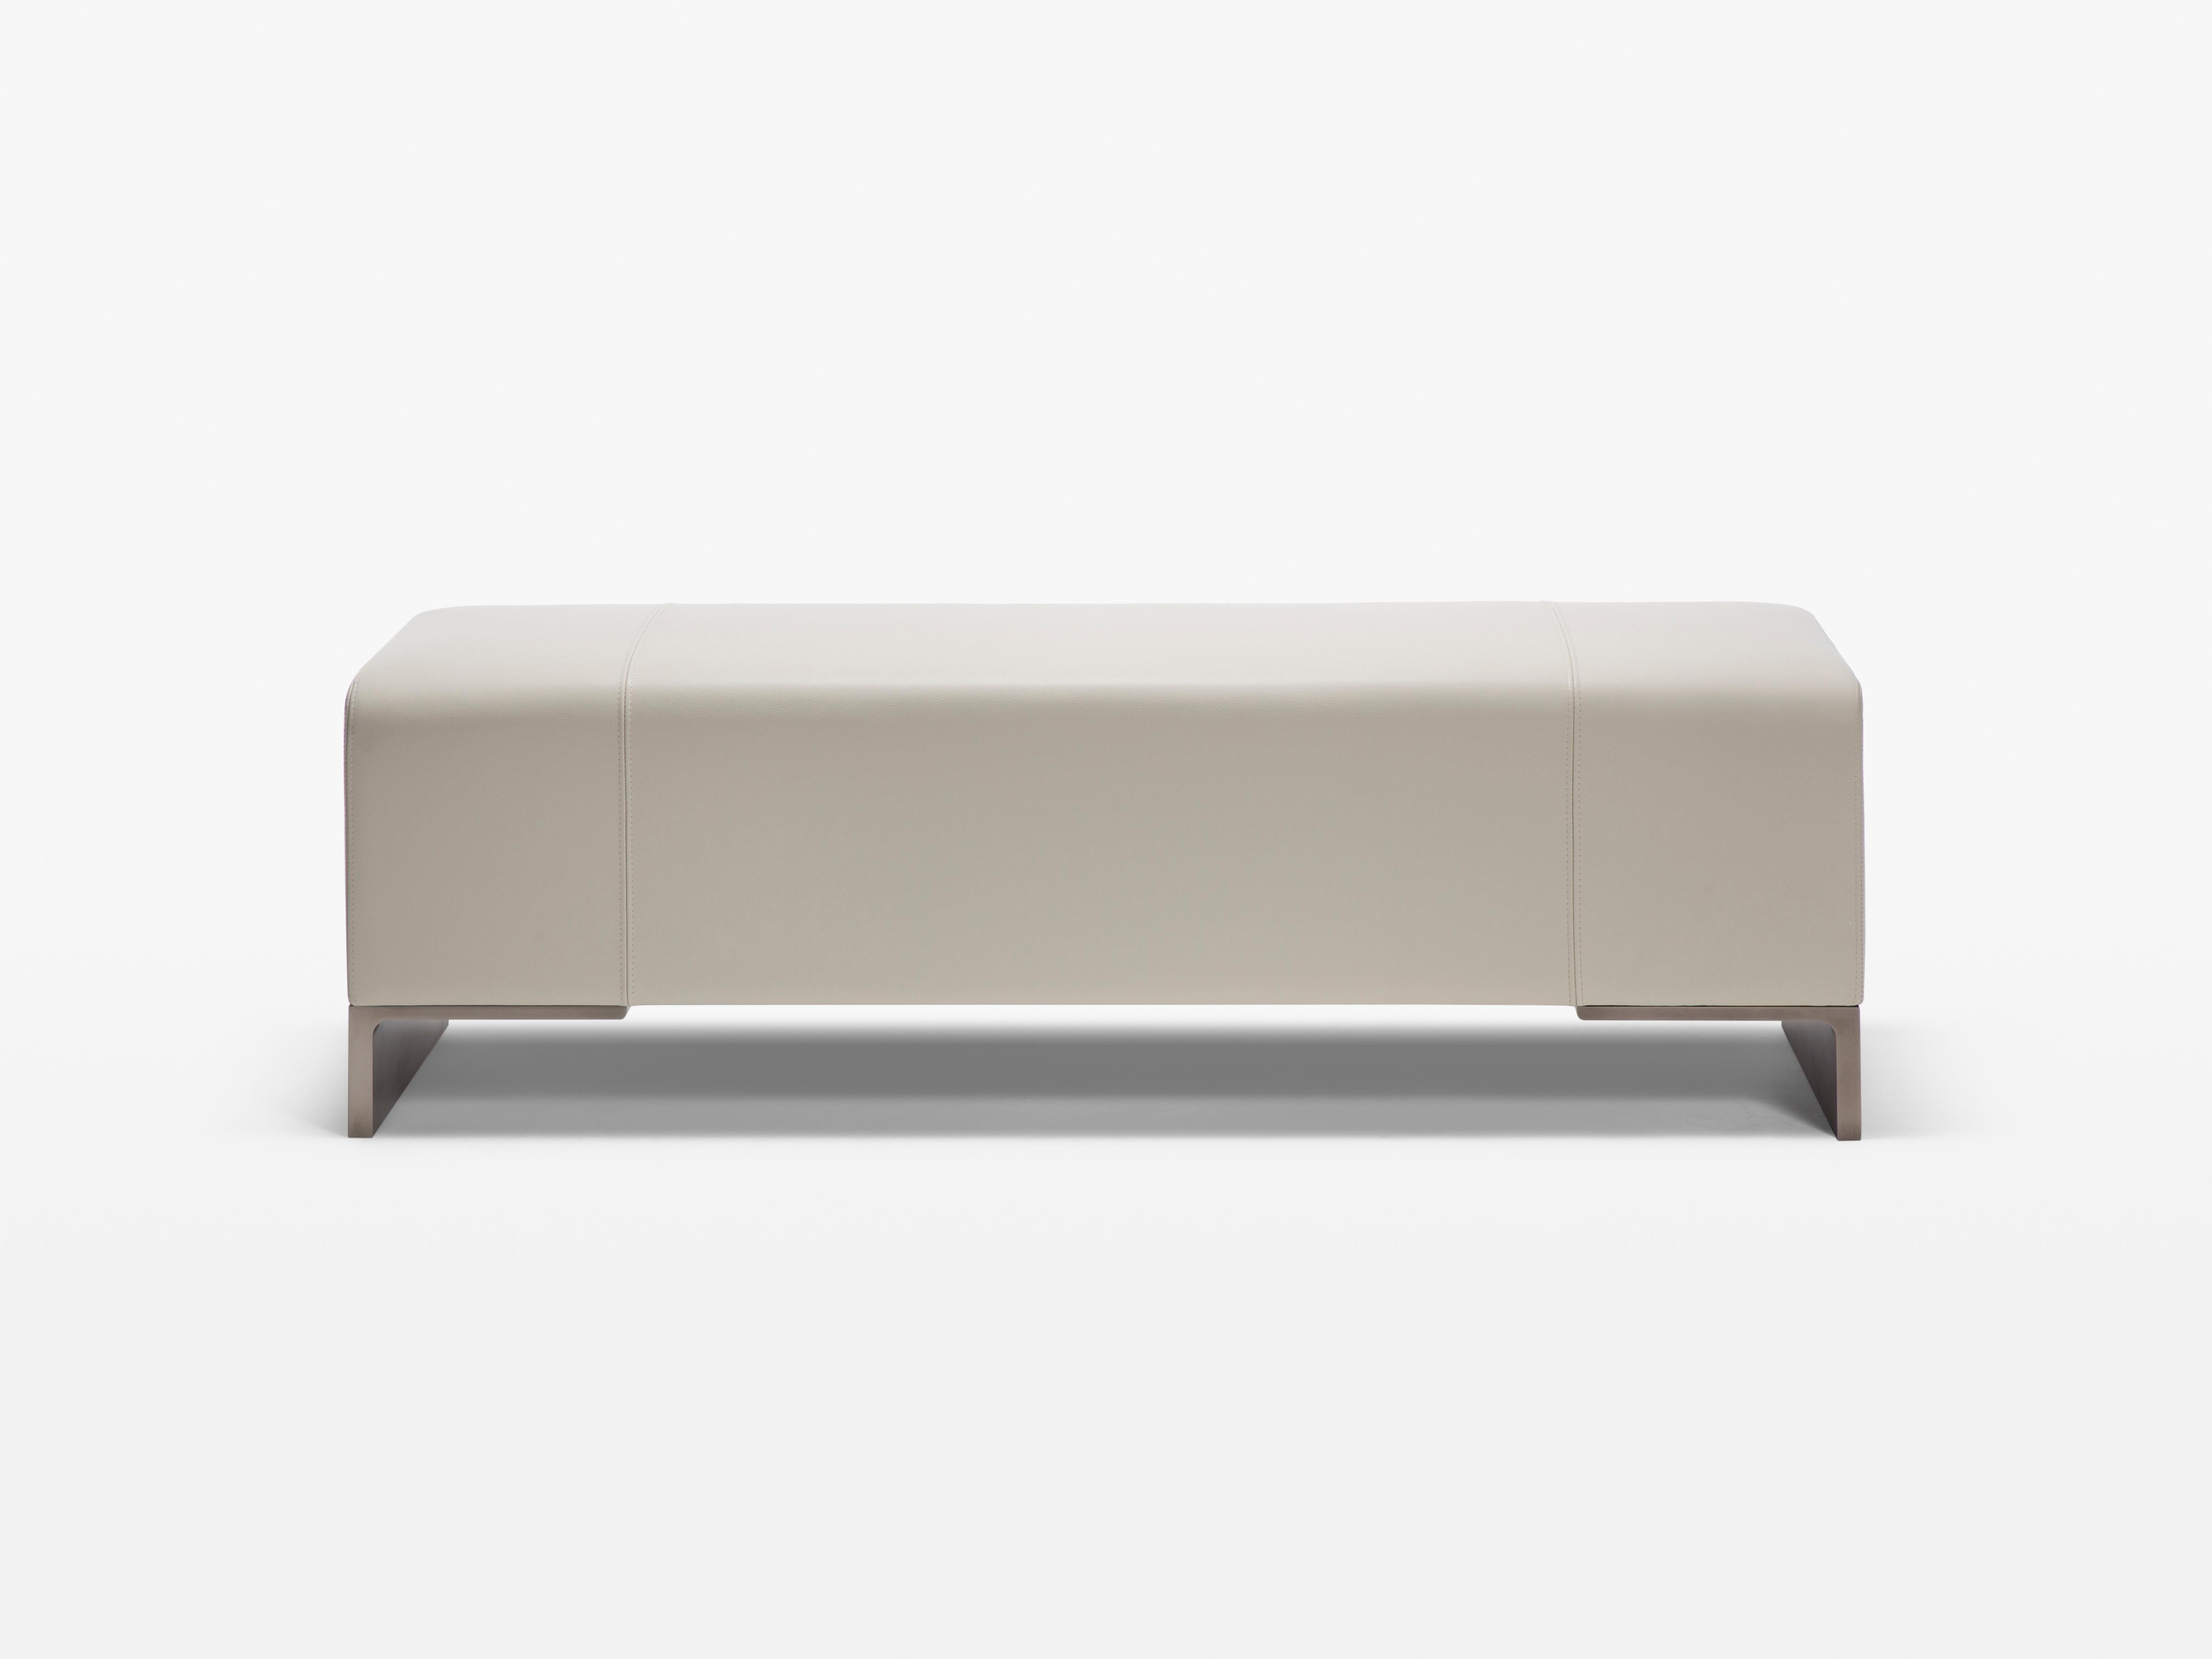 HOLLY HUNT Arakan bench in silver smoke and bleached leather. A voluminous bench that brings gravity and softness to any room, ideal at the foot of the bed. Beautiful and modern with a gorgeous brushed metal base. Upholstered in our delicious HOLLY